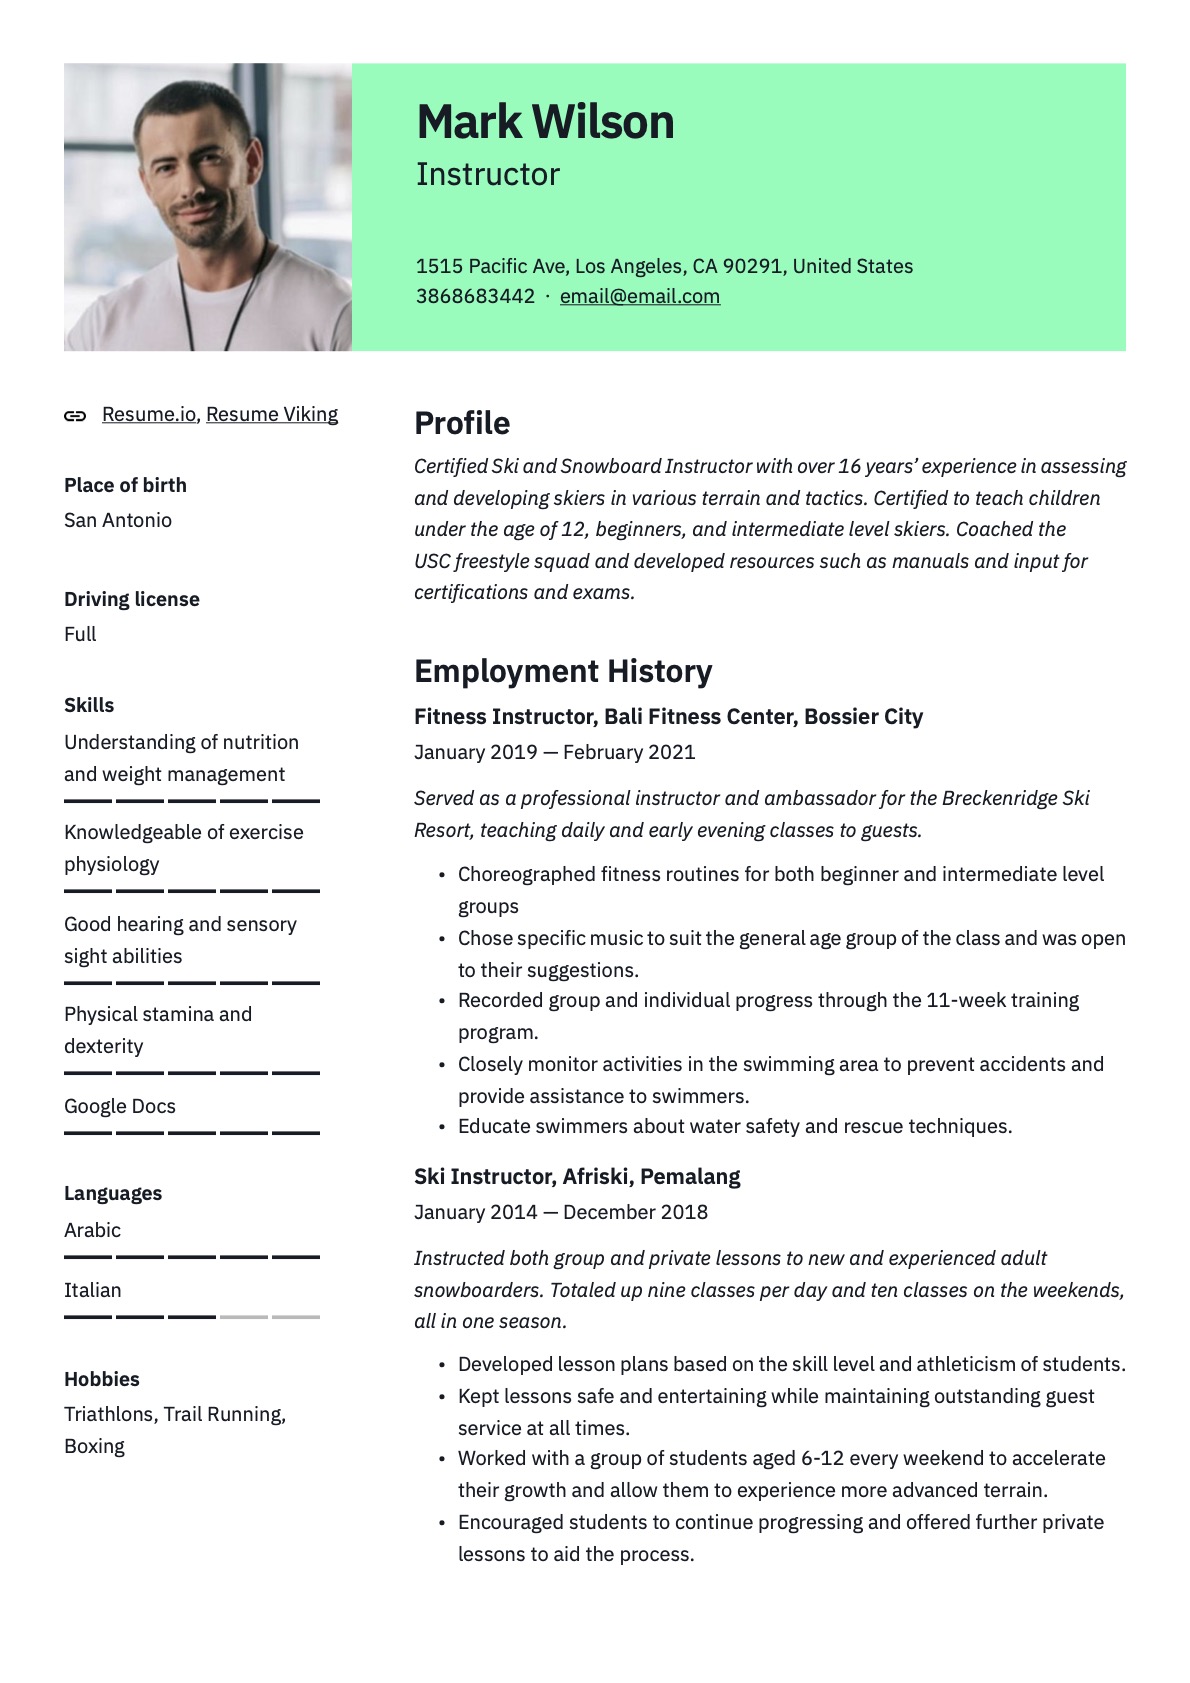 Example Resume Instructor-3